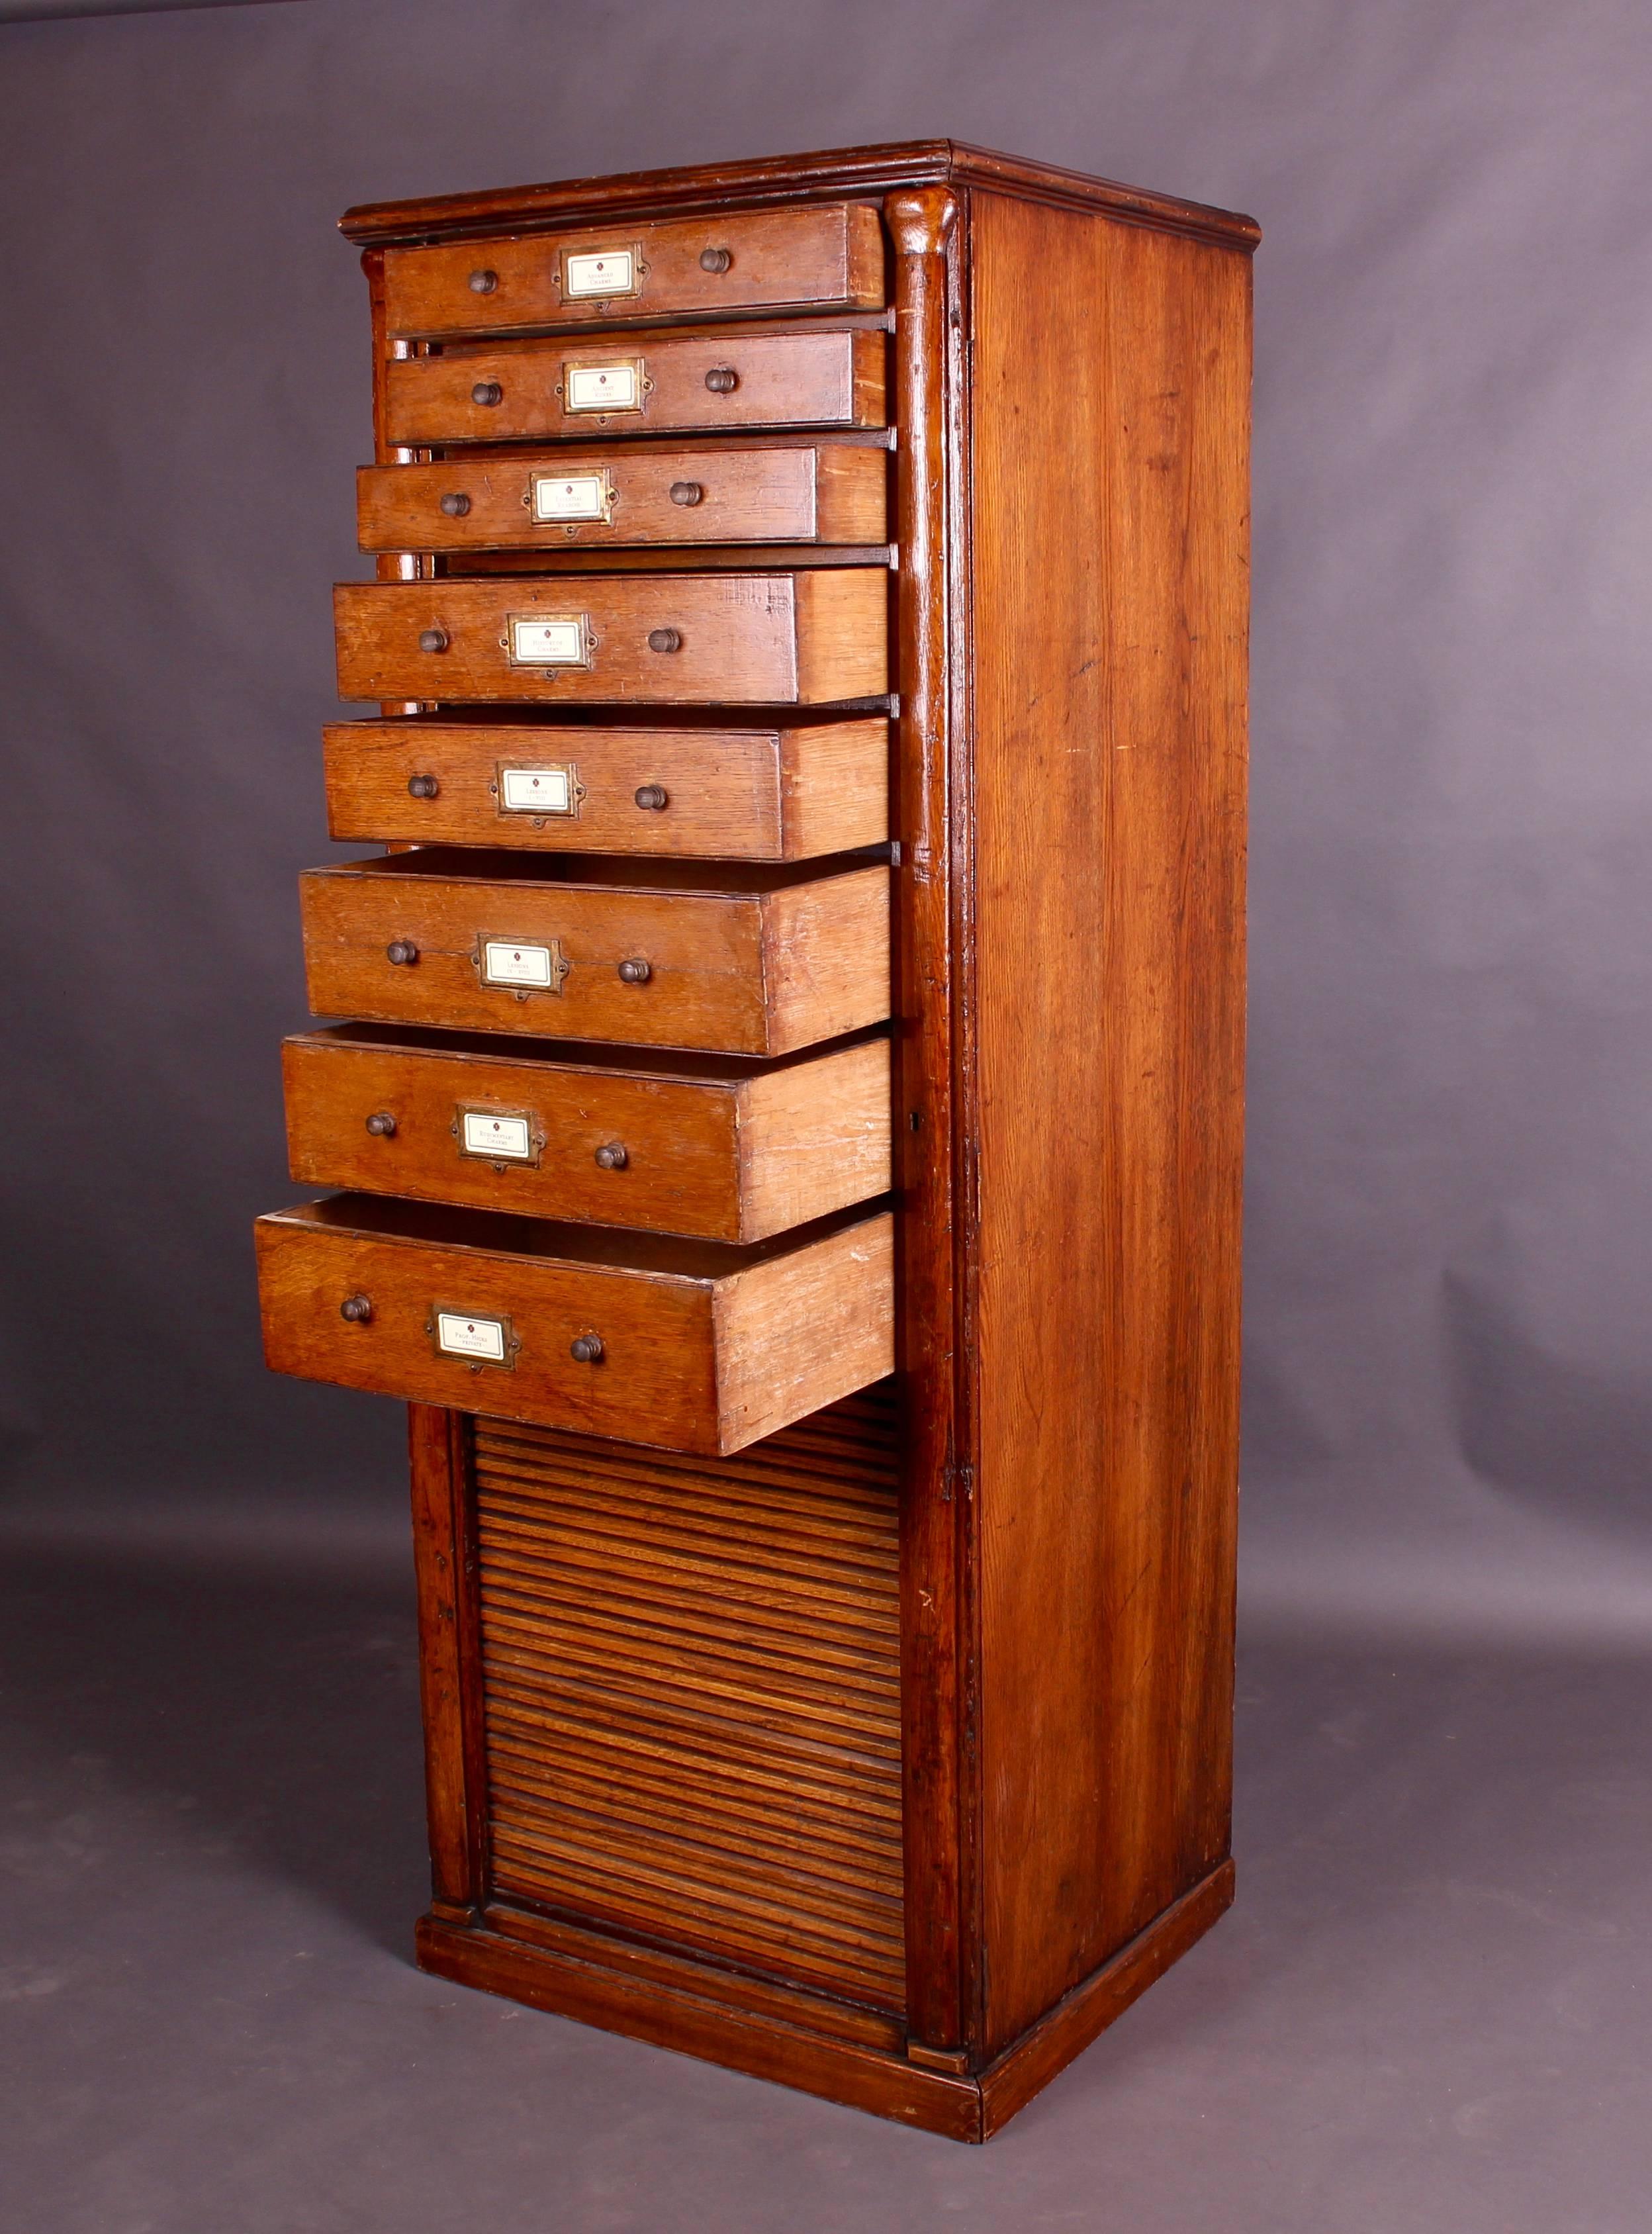 Edwardian English Oak Filing Cabinet or Chest of Drawers, circa 1910